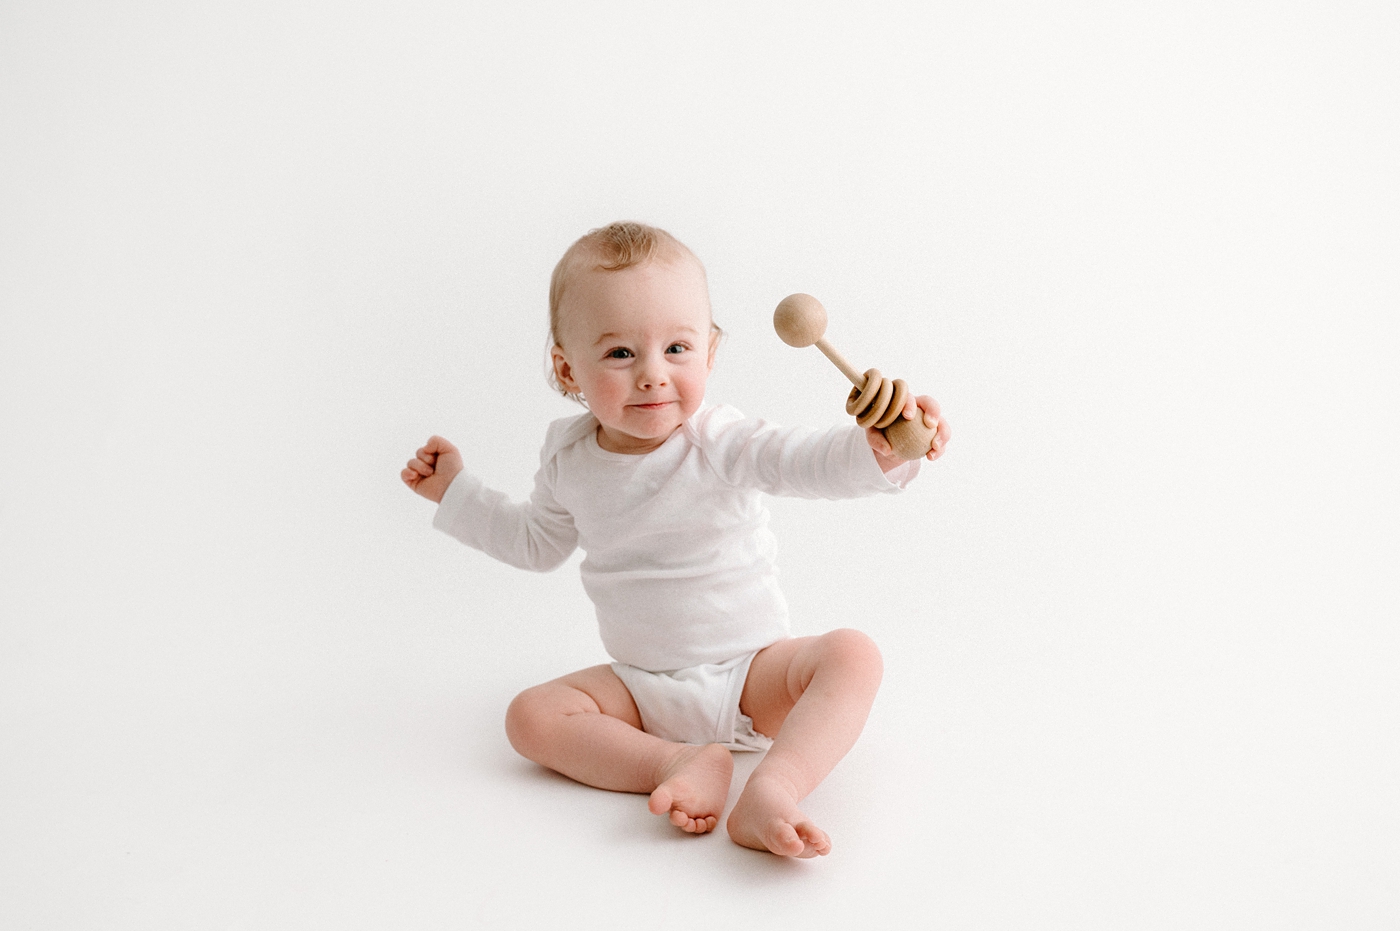 Baby boy plays with wooden rattle during Gig Harbor milestone session. Photo by Meg Newton Photography.